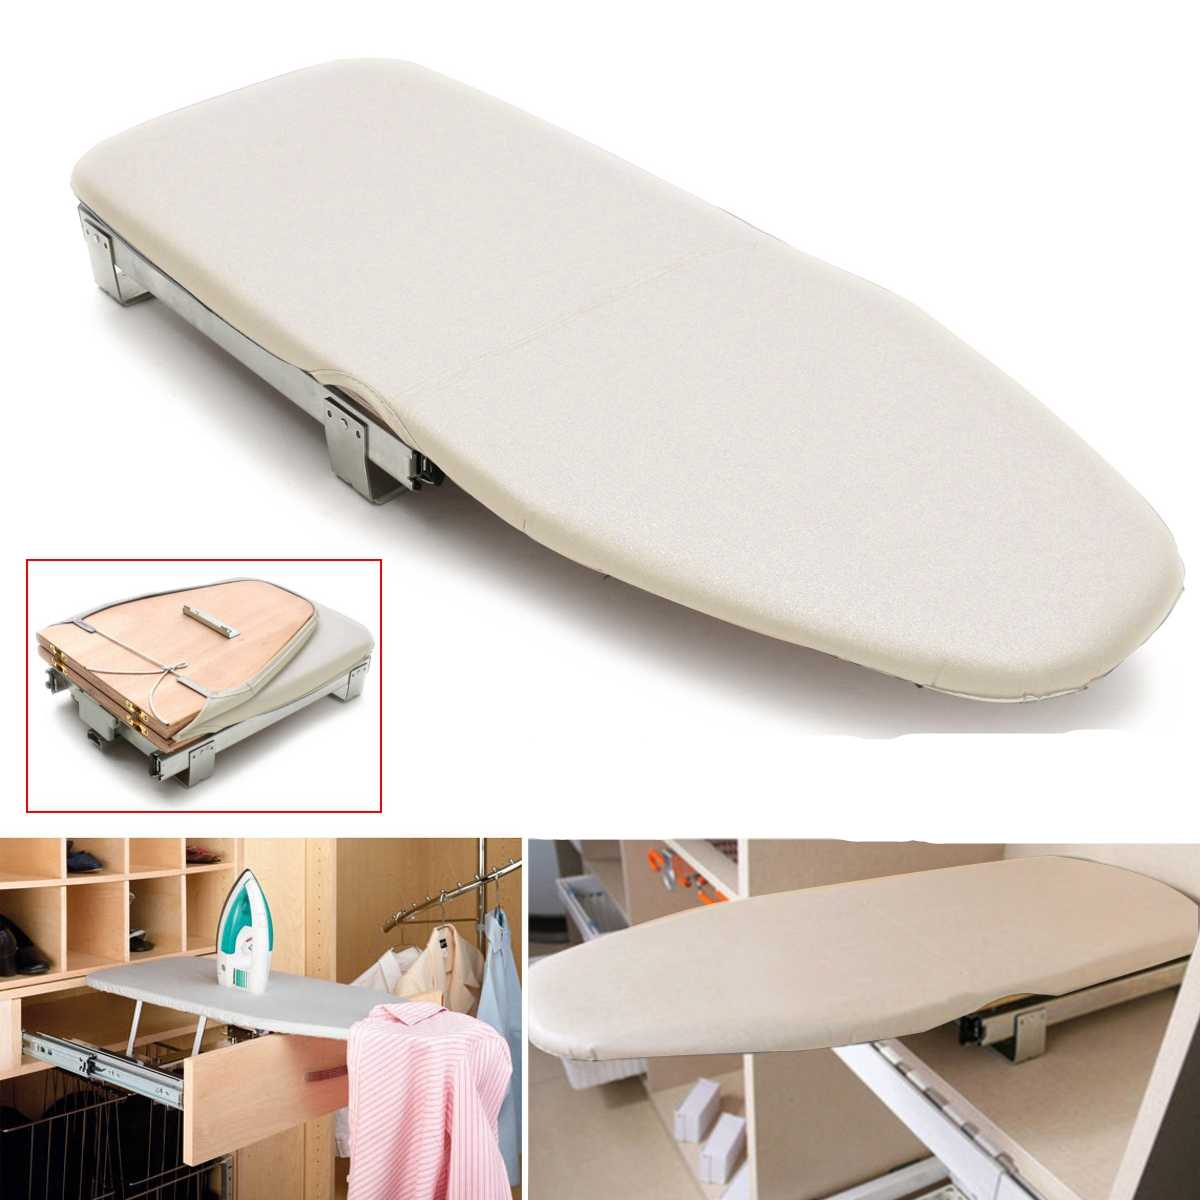 Folding Ironing Board with Cover